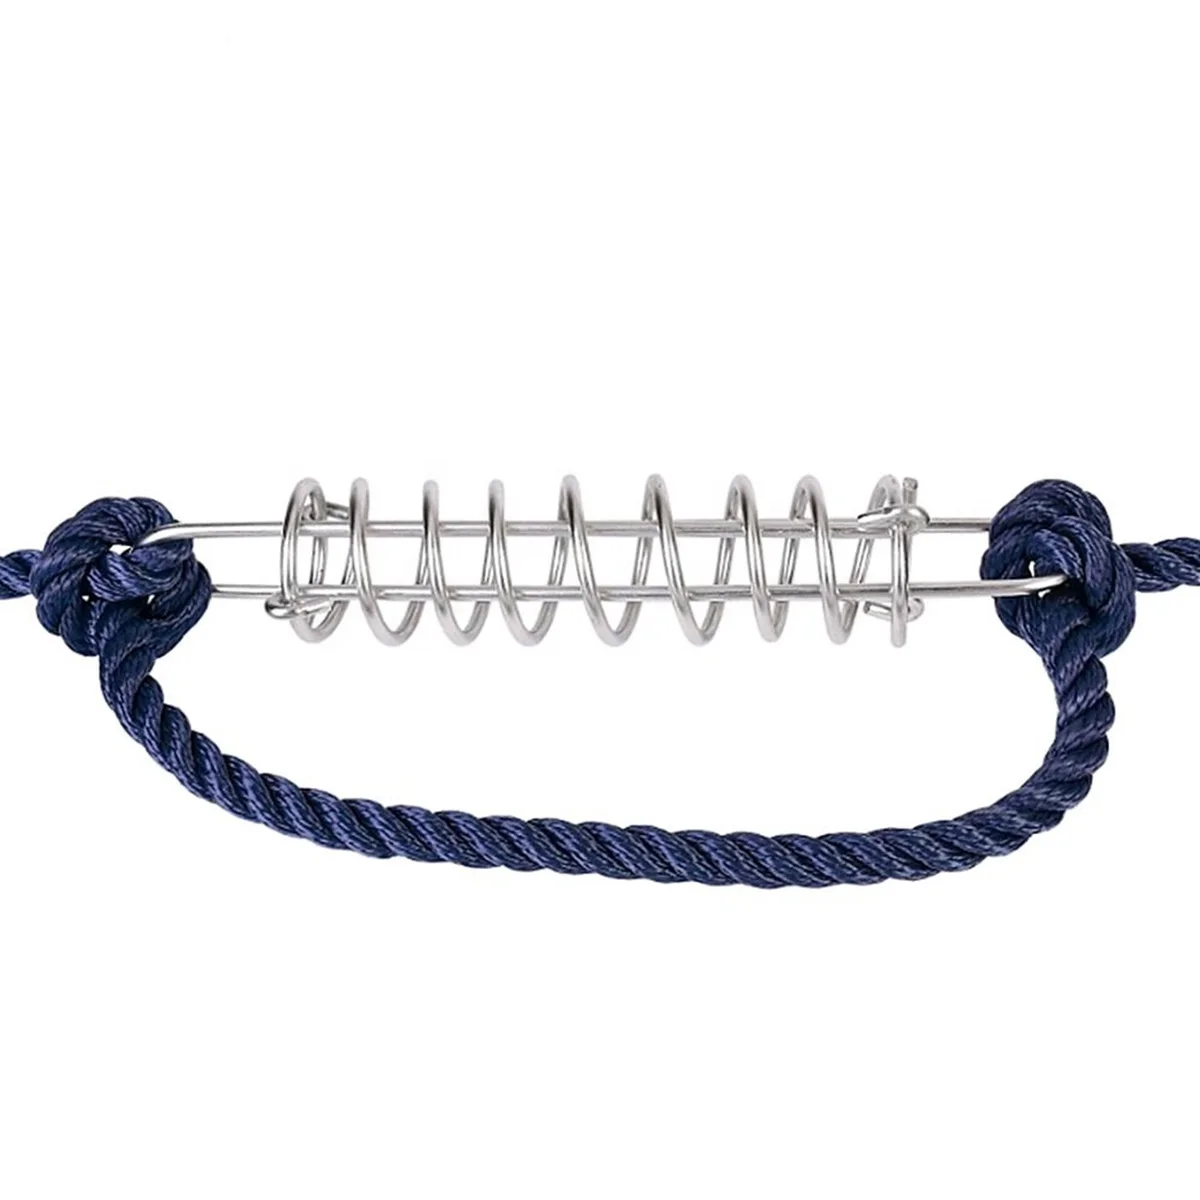 Non-rust Marine Grade Stainless Steel Boat Anchor Dock Line Mooring Spring 